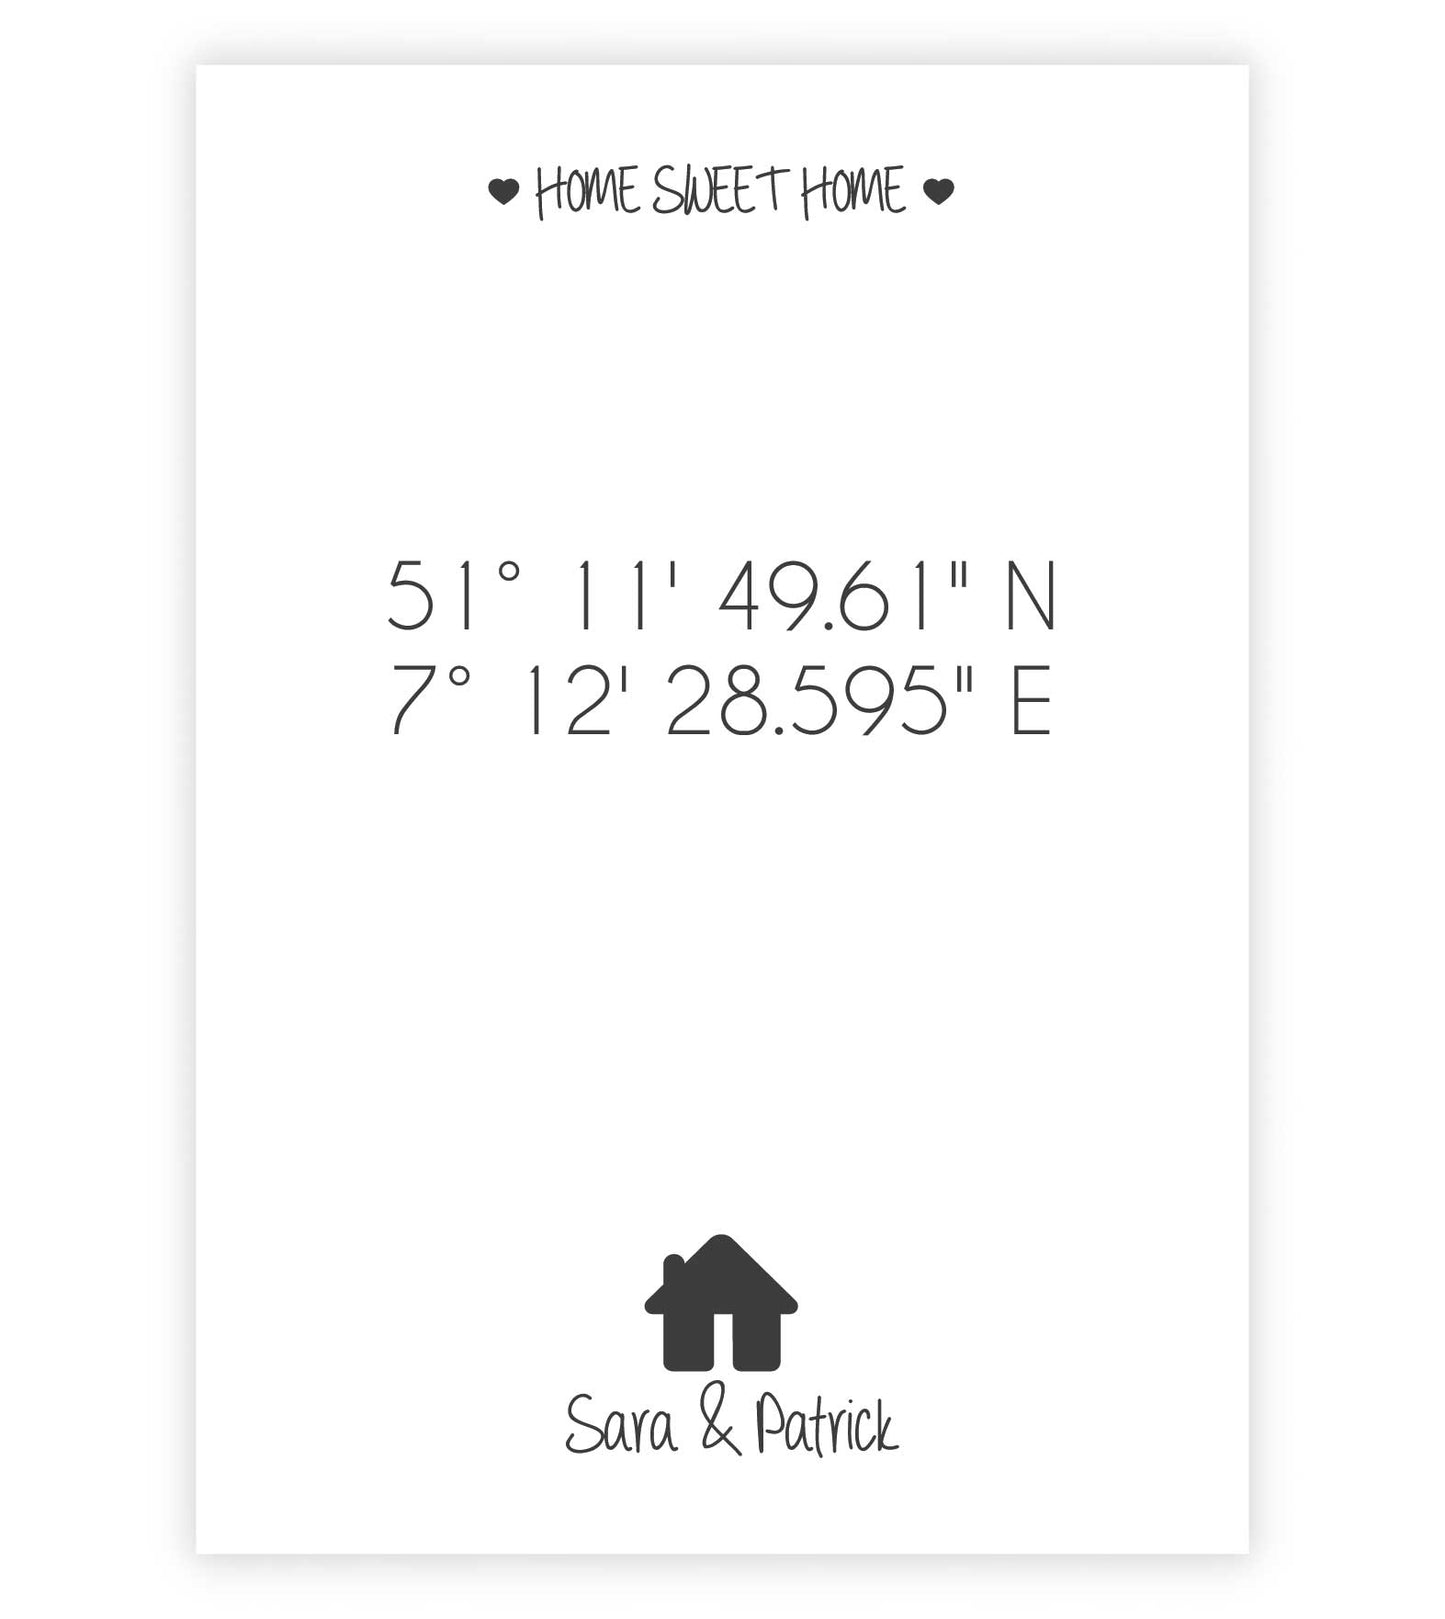 Personalized Poster "HOME SWEET HOME" - House 